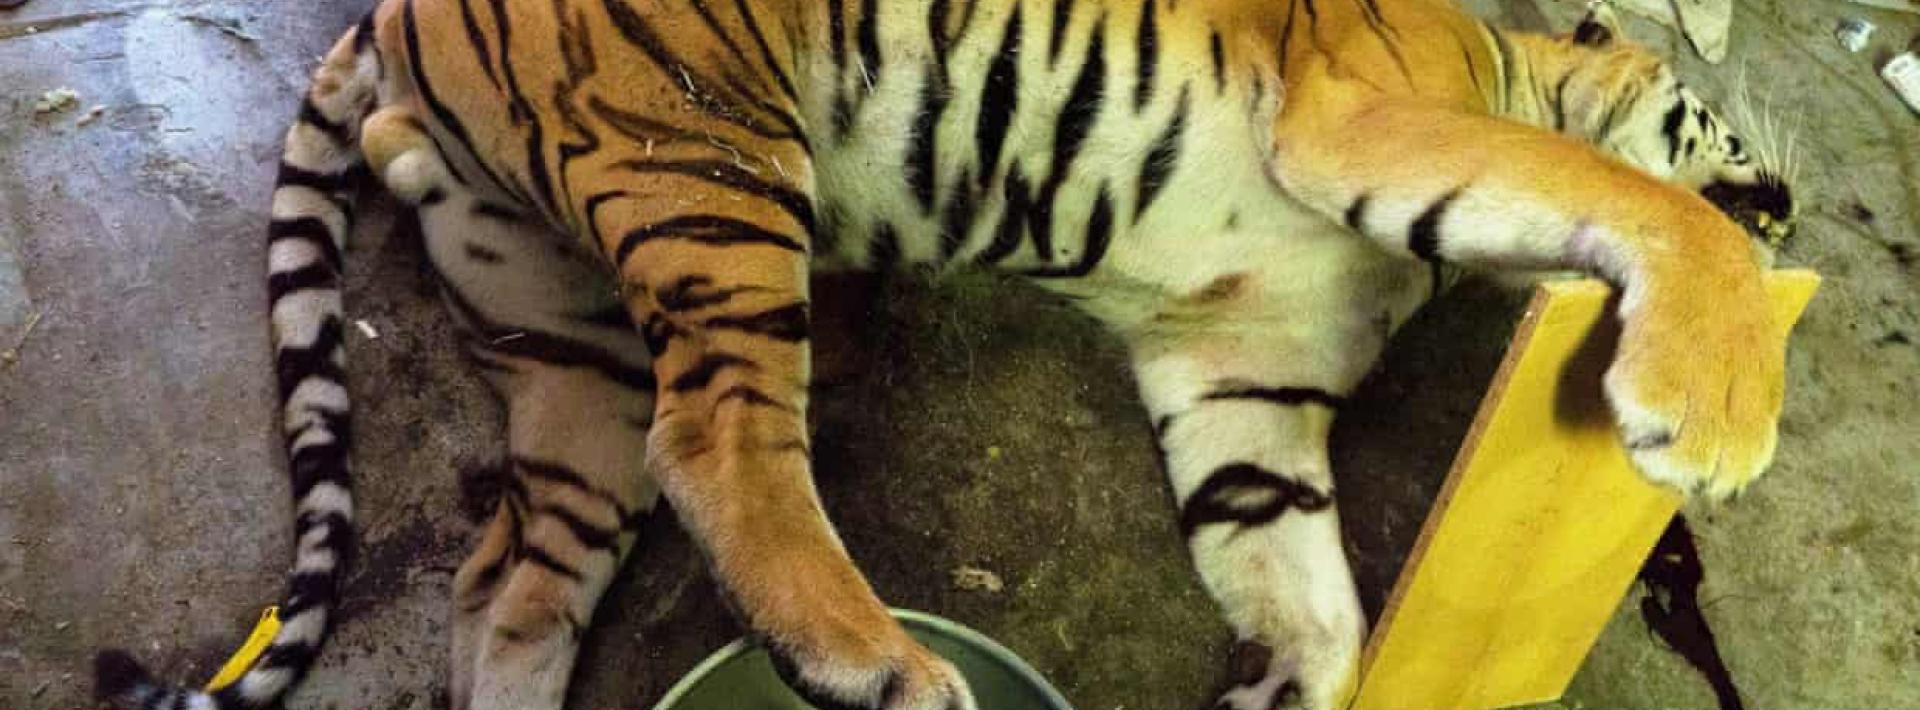 Gruesome discovery of Czech tiger farm exposes illegal trade in heart of Europe